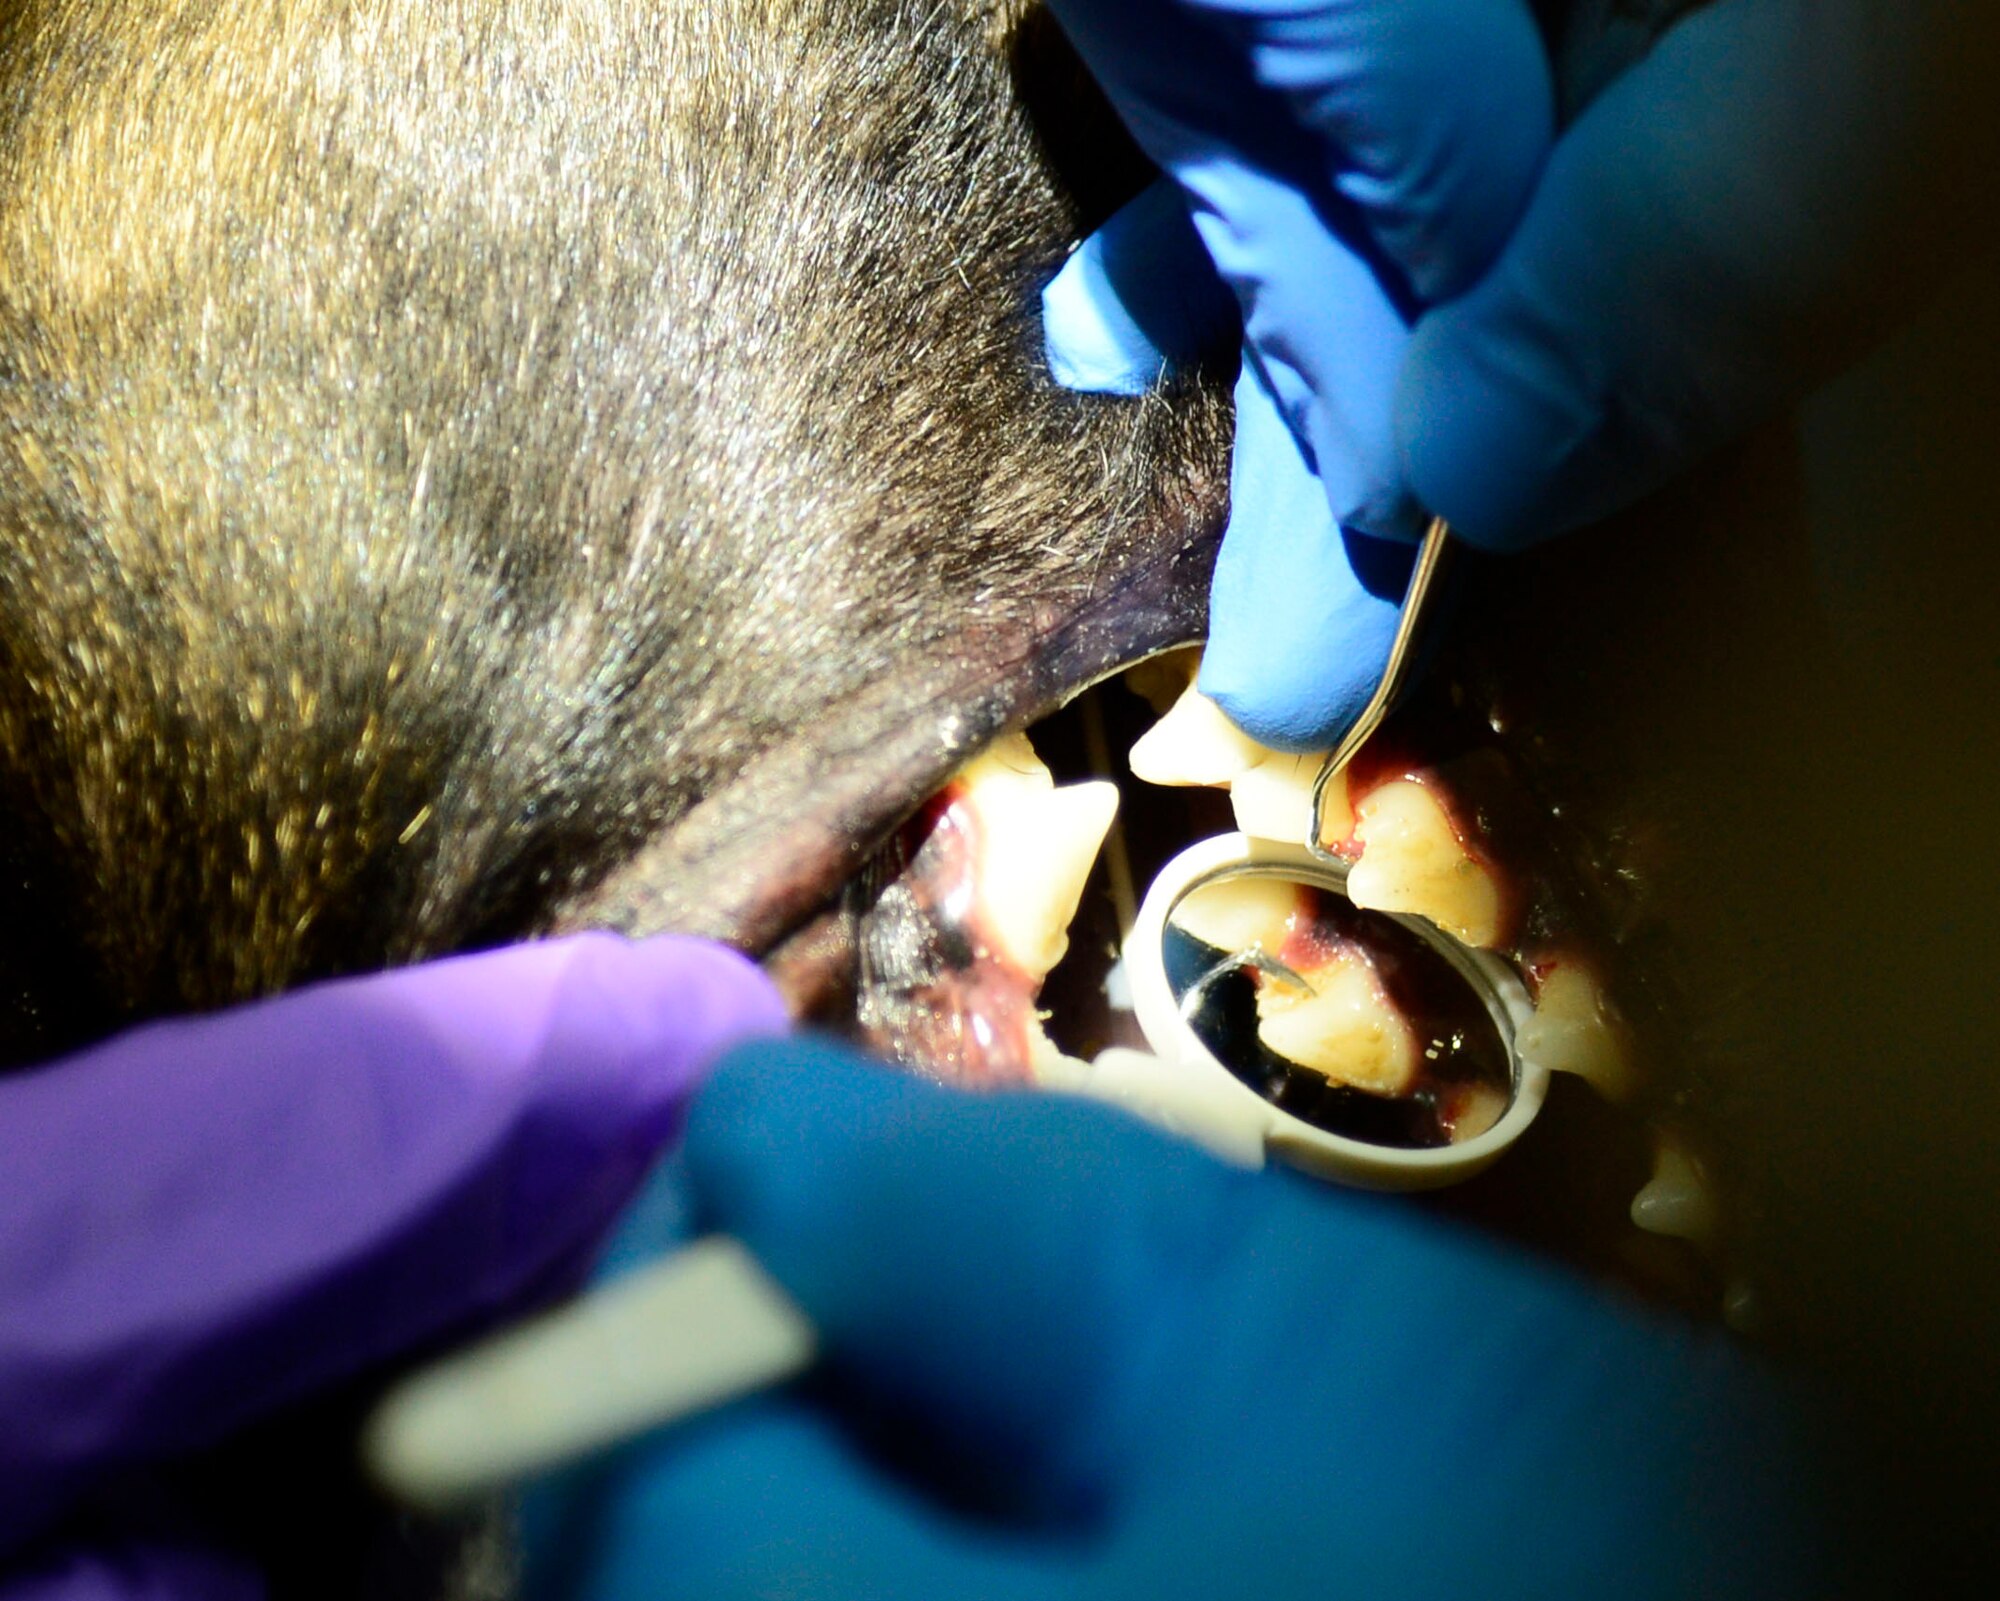 Members from the 386th Expeditionary Medical Support Squadron and the 463rd Military Detachment Veterinary Service scrape plaque off, 386th Expeditionary Security Forces Squadron Military Working Dog, FFrida’s teeth during a dental cleaning at an undisclosed location in Southwest Asia Aug. 27, 2015. MWDs receive routine medical care to aid their human military partners during Operation Inherent Resolve. (U.S. Air Force photo by Senior Airman Racheal E. Watson/Released)